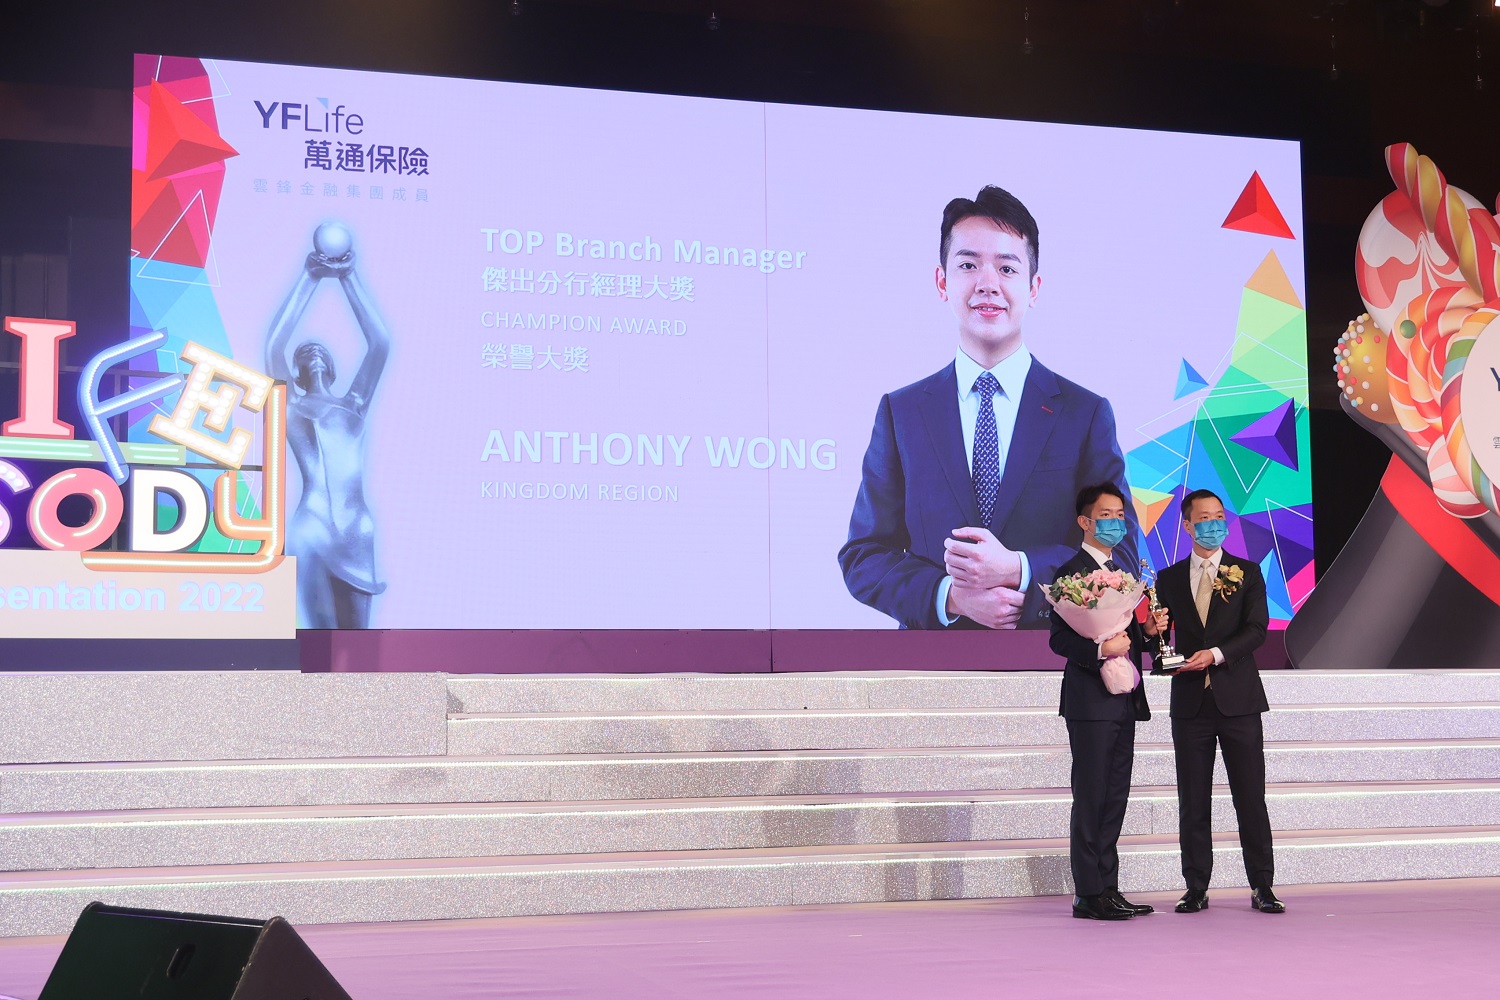 Mr. Anthony Wong, Champion Award winner of Top Branch Manager. 